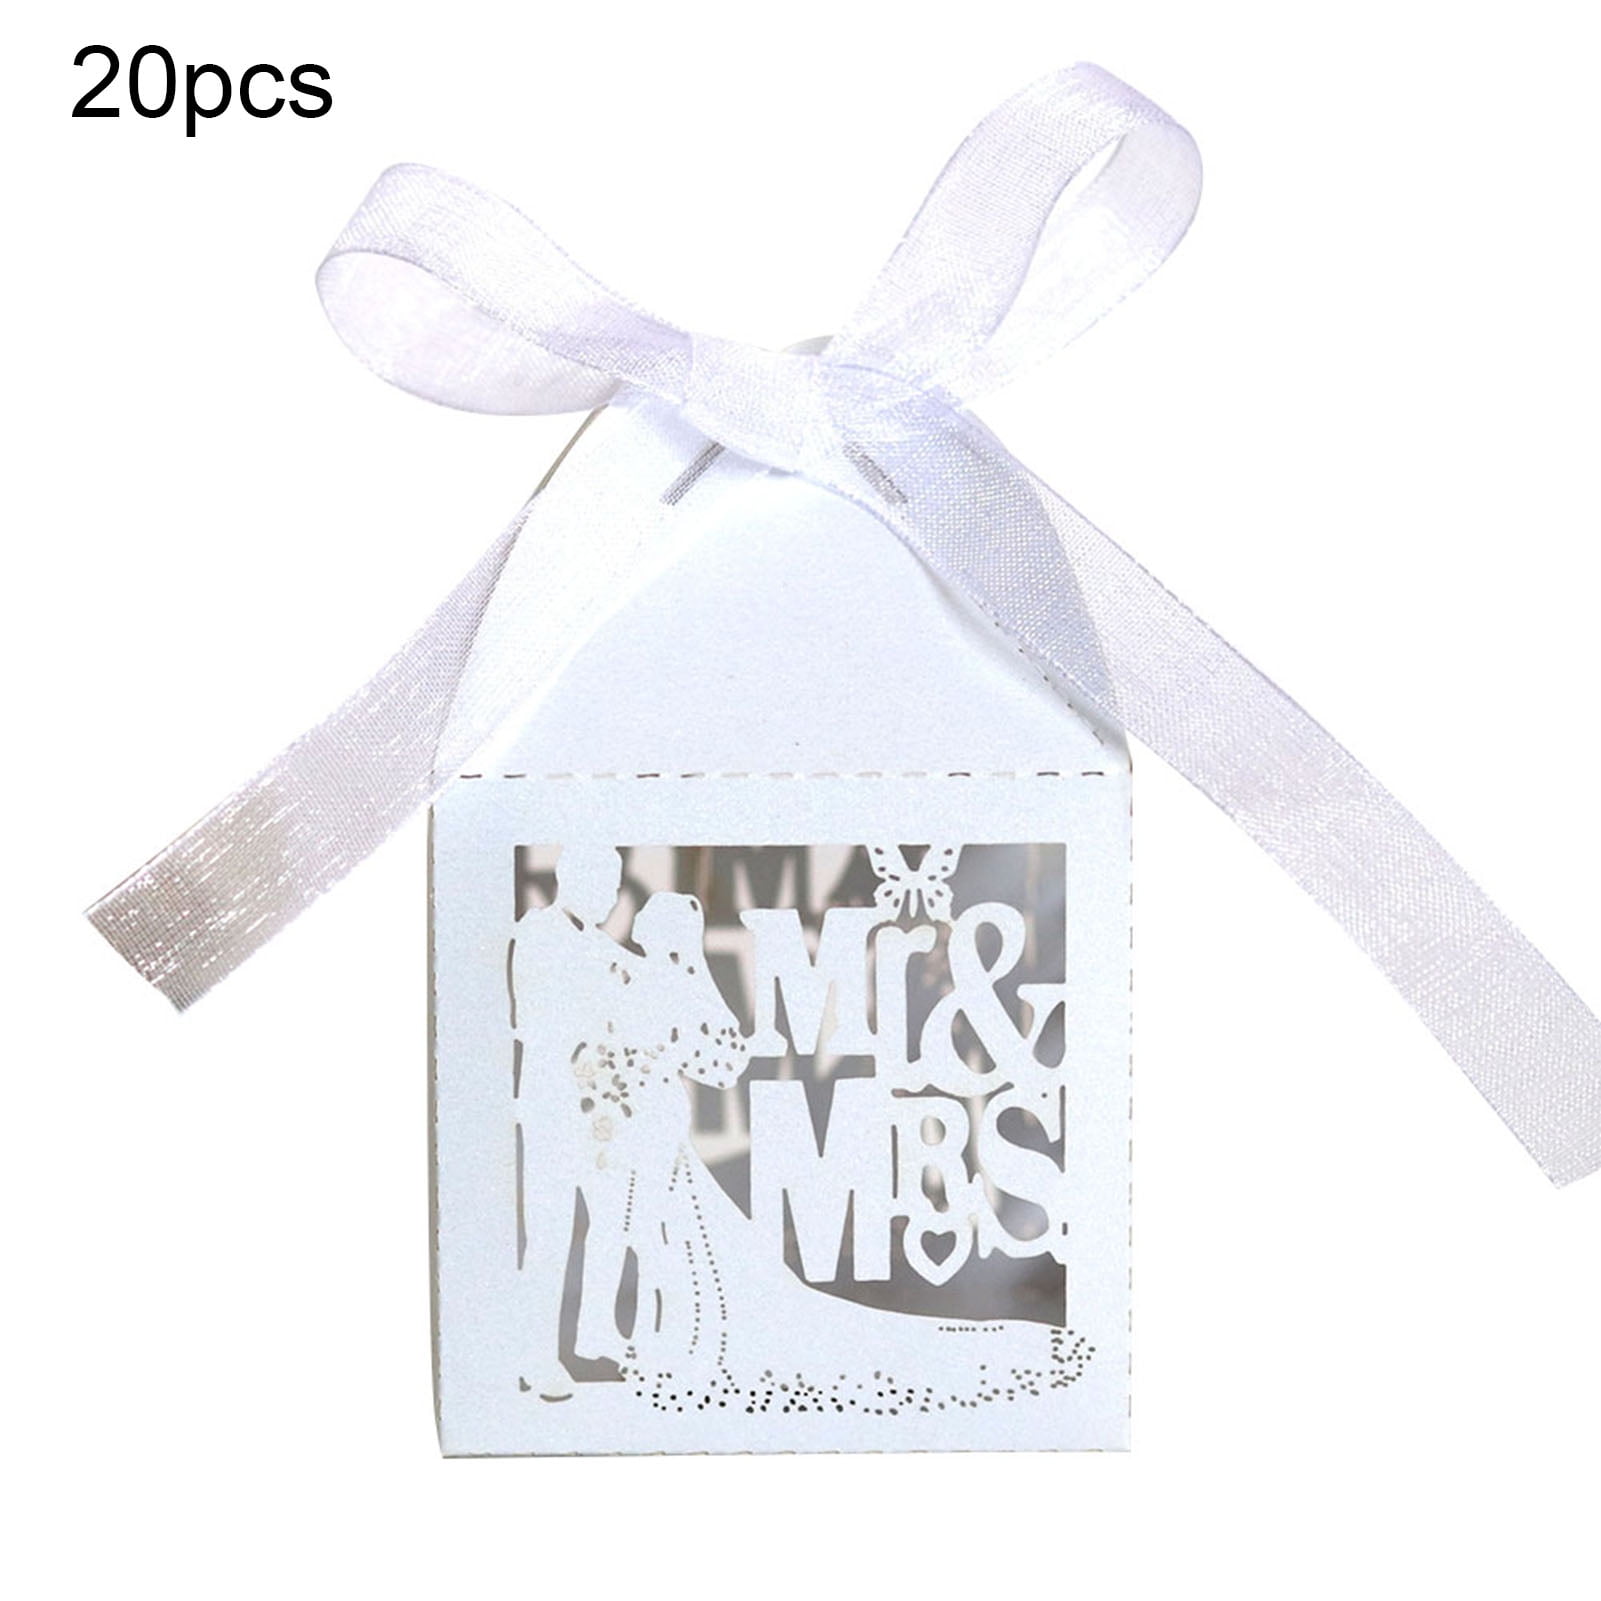 20pcs Butterfly Cardboard Mini Candy Boxes Wedding Favors Gift Box Party Decor 